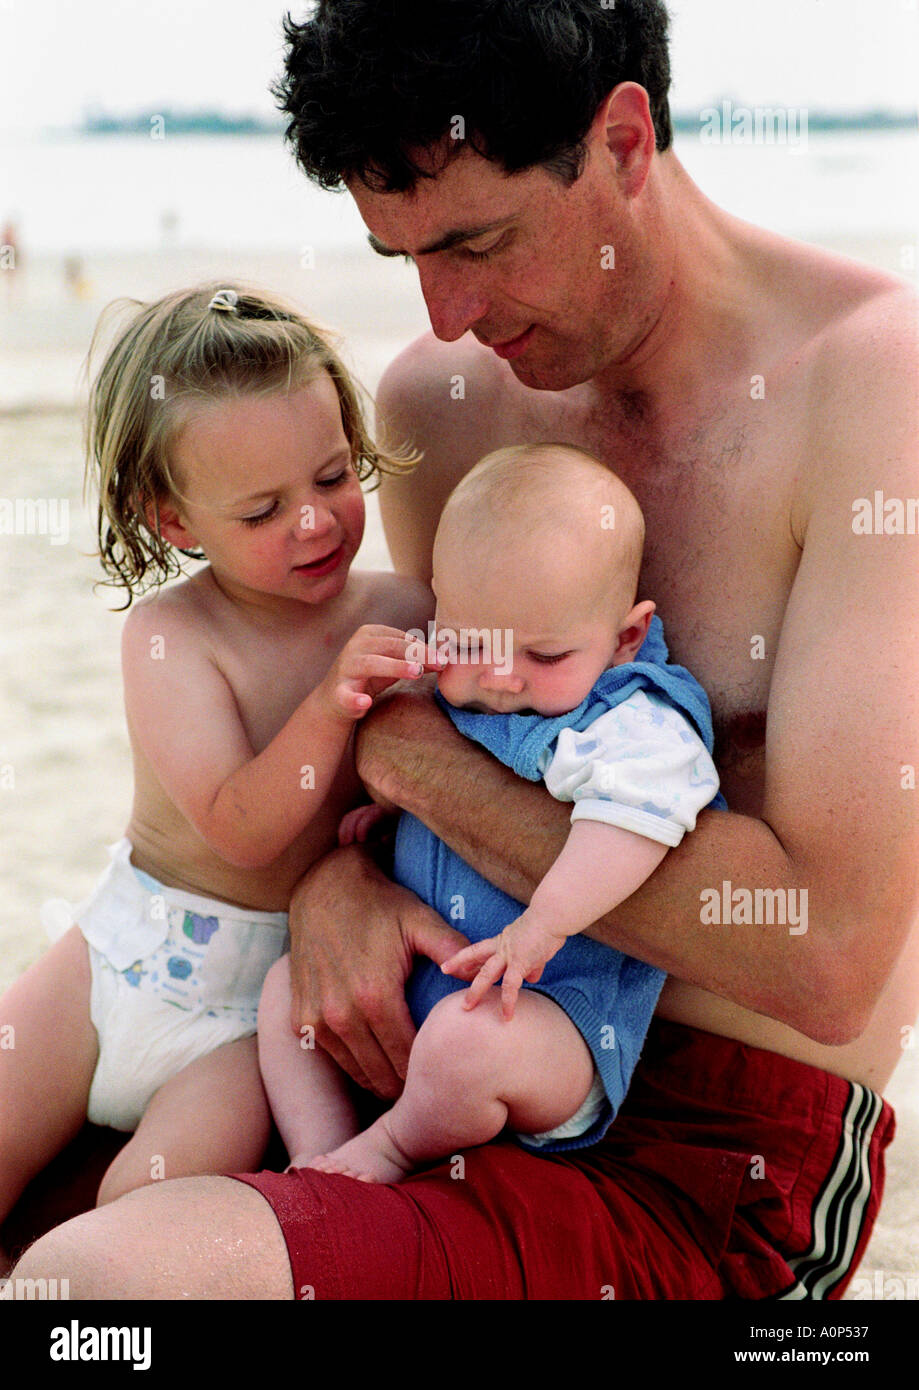 father holding new born baby at the beach on holiday, with sister pinching the baby's cheek Stock Photo